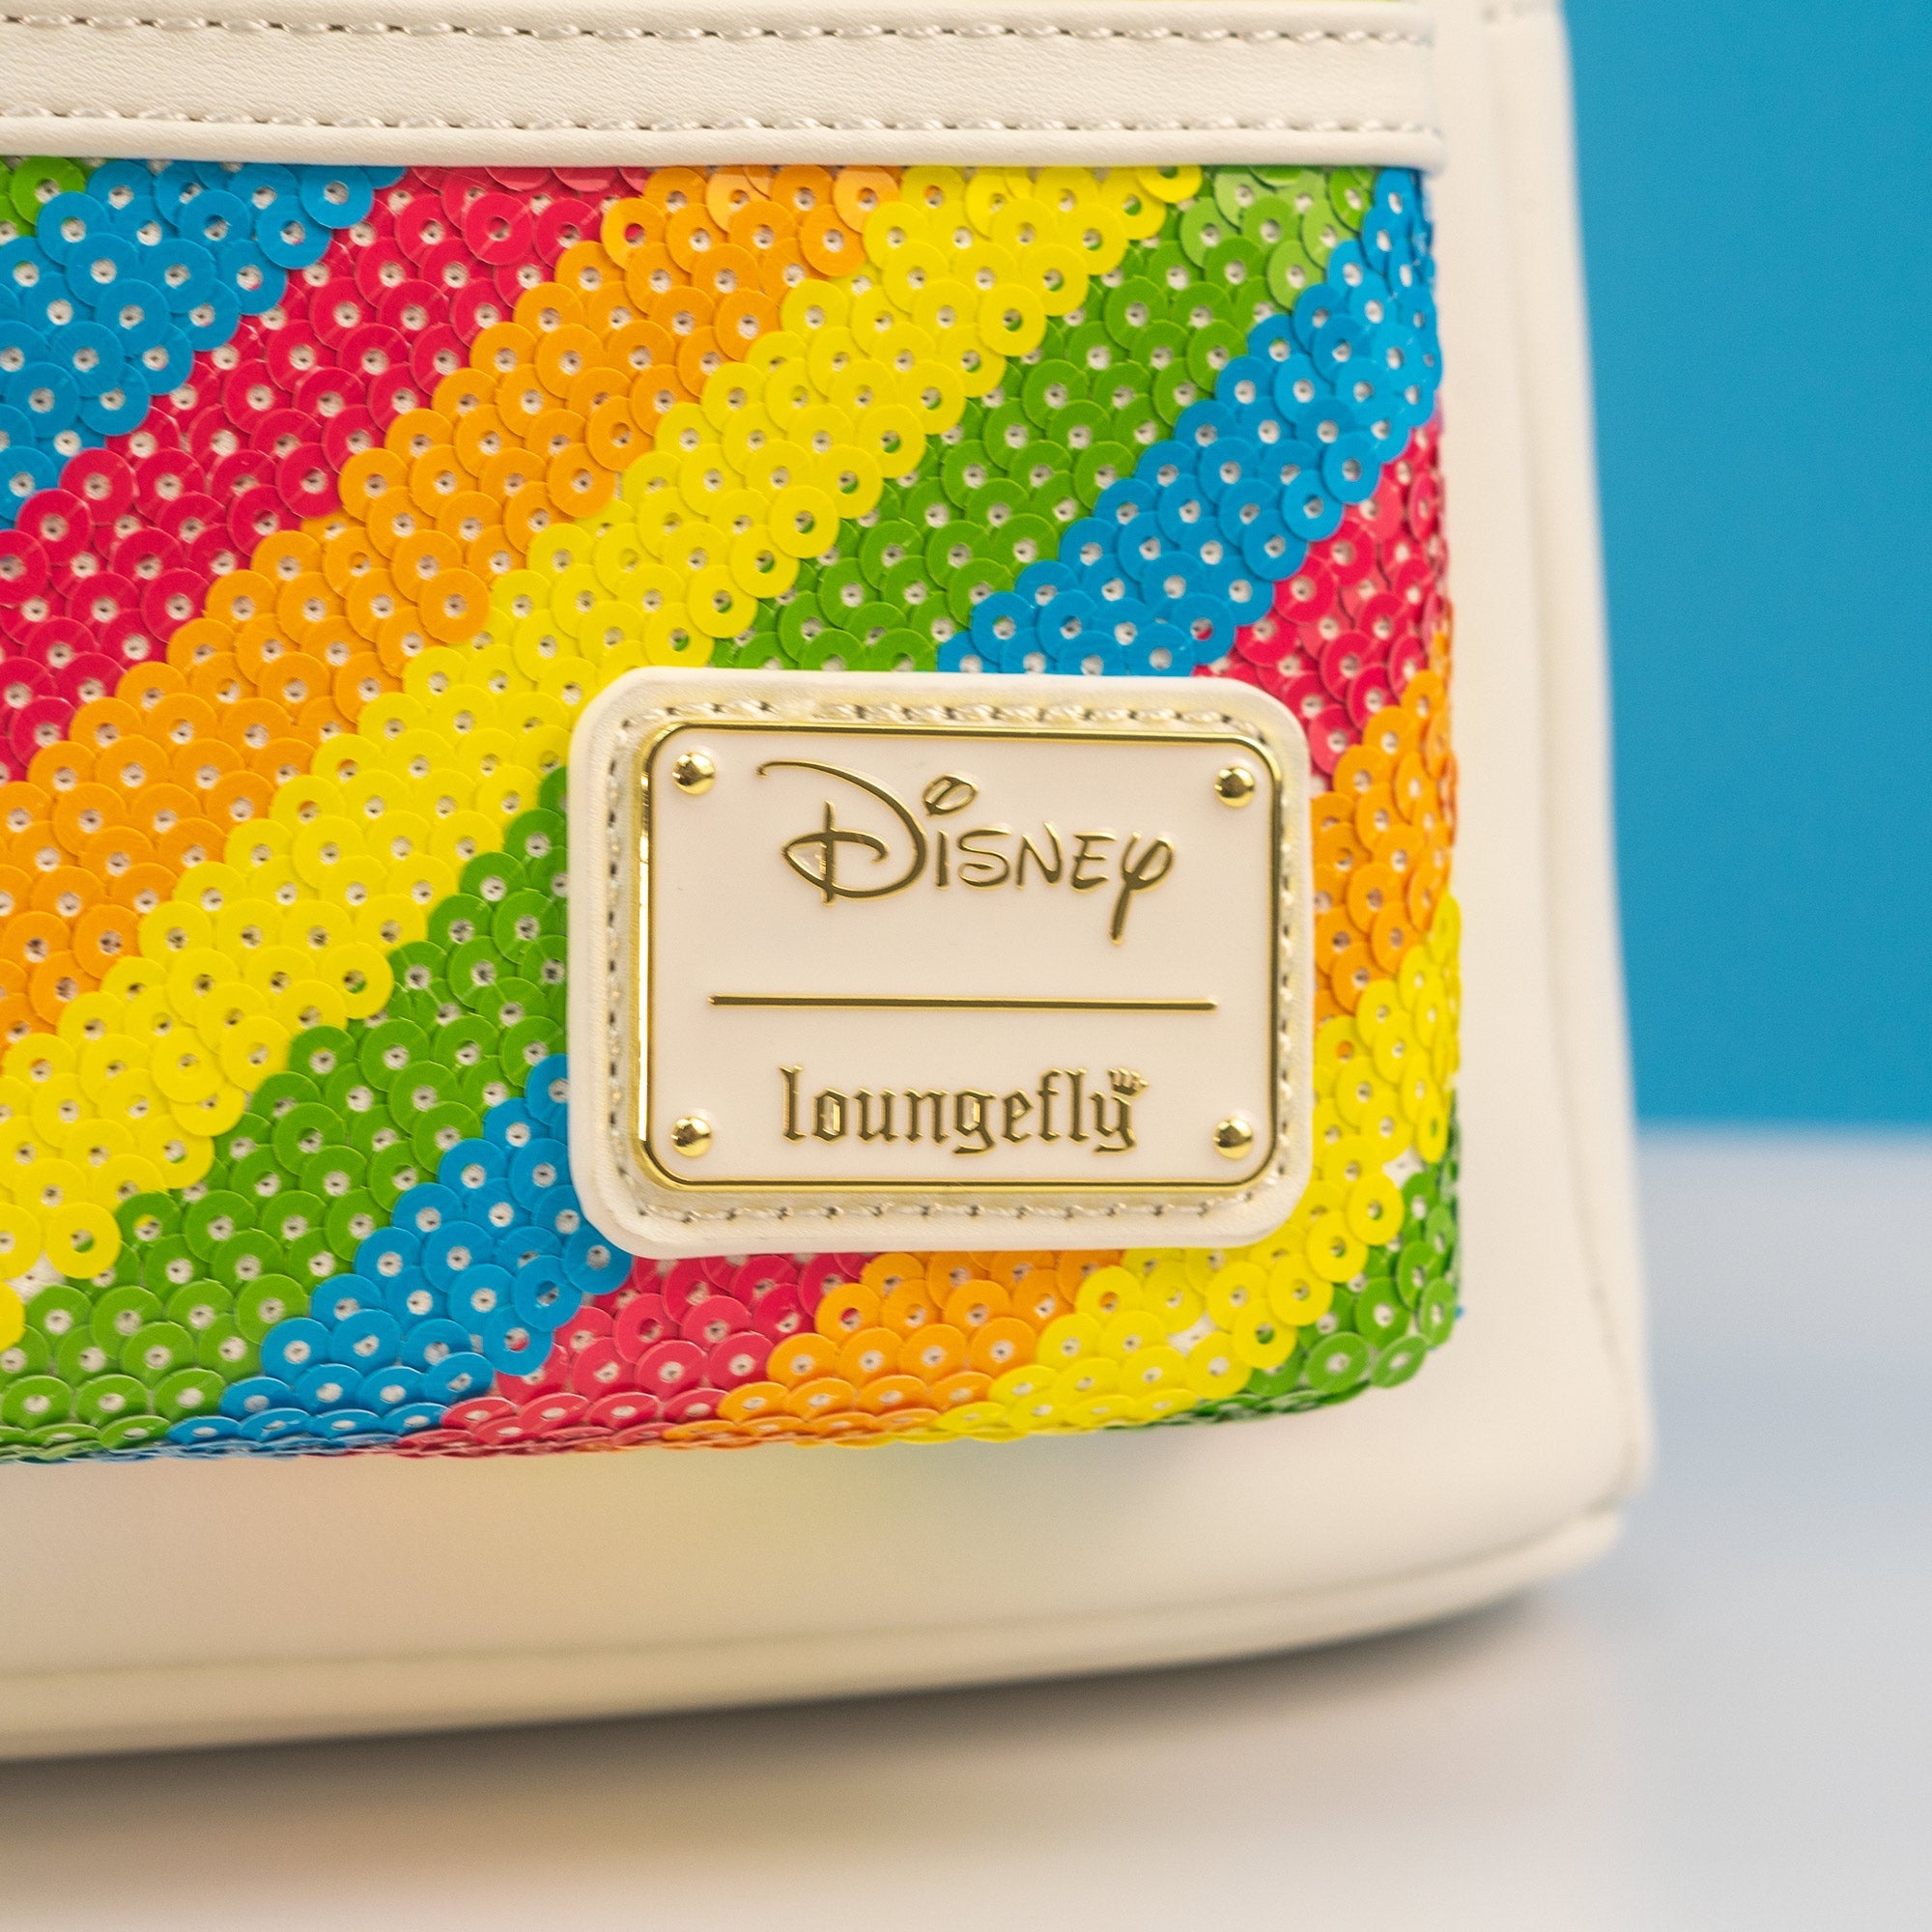 Loungefly x Disney Minnie Mouse Sequin Rainbow Mini Backpack - GeekCore